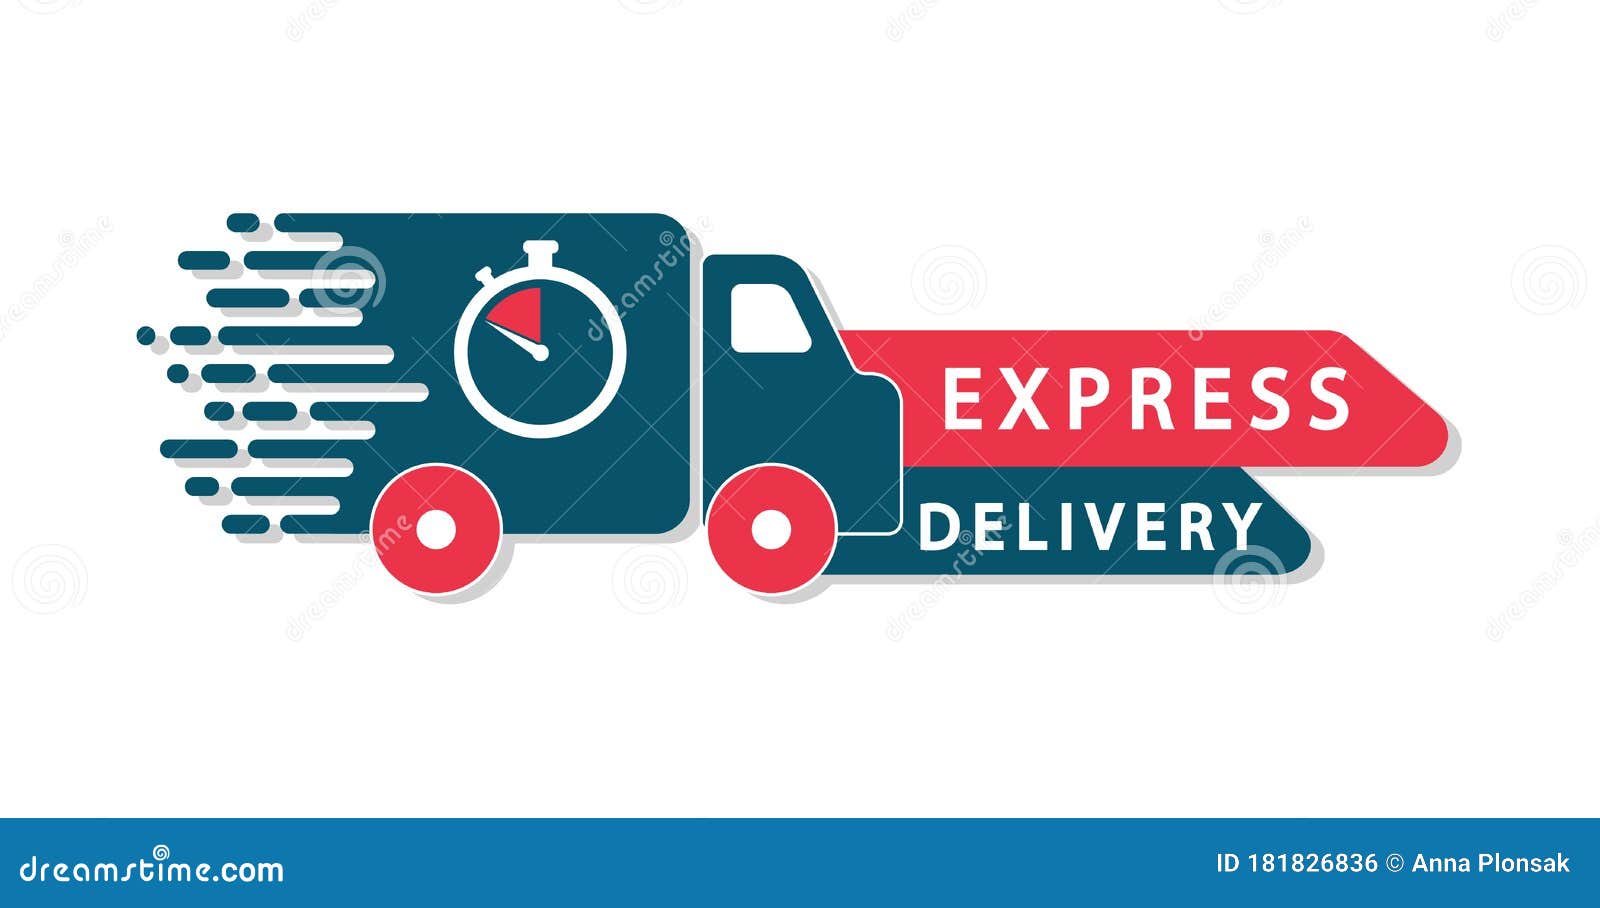 Express Delivery Logo. Shipping Services Stock Vector - Illustration of ...